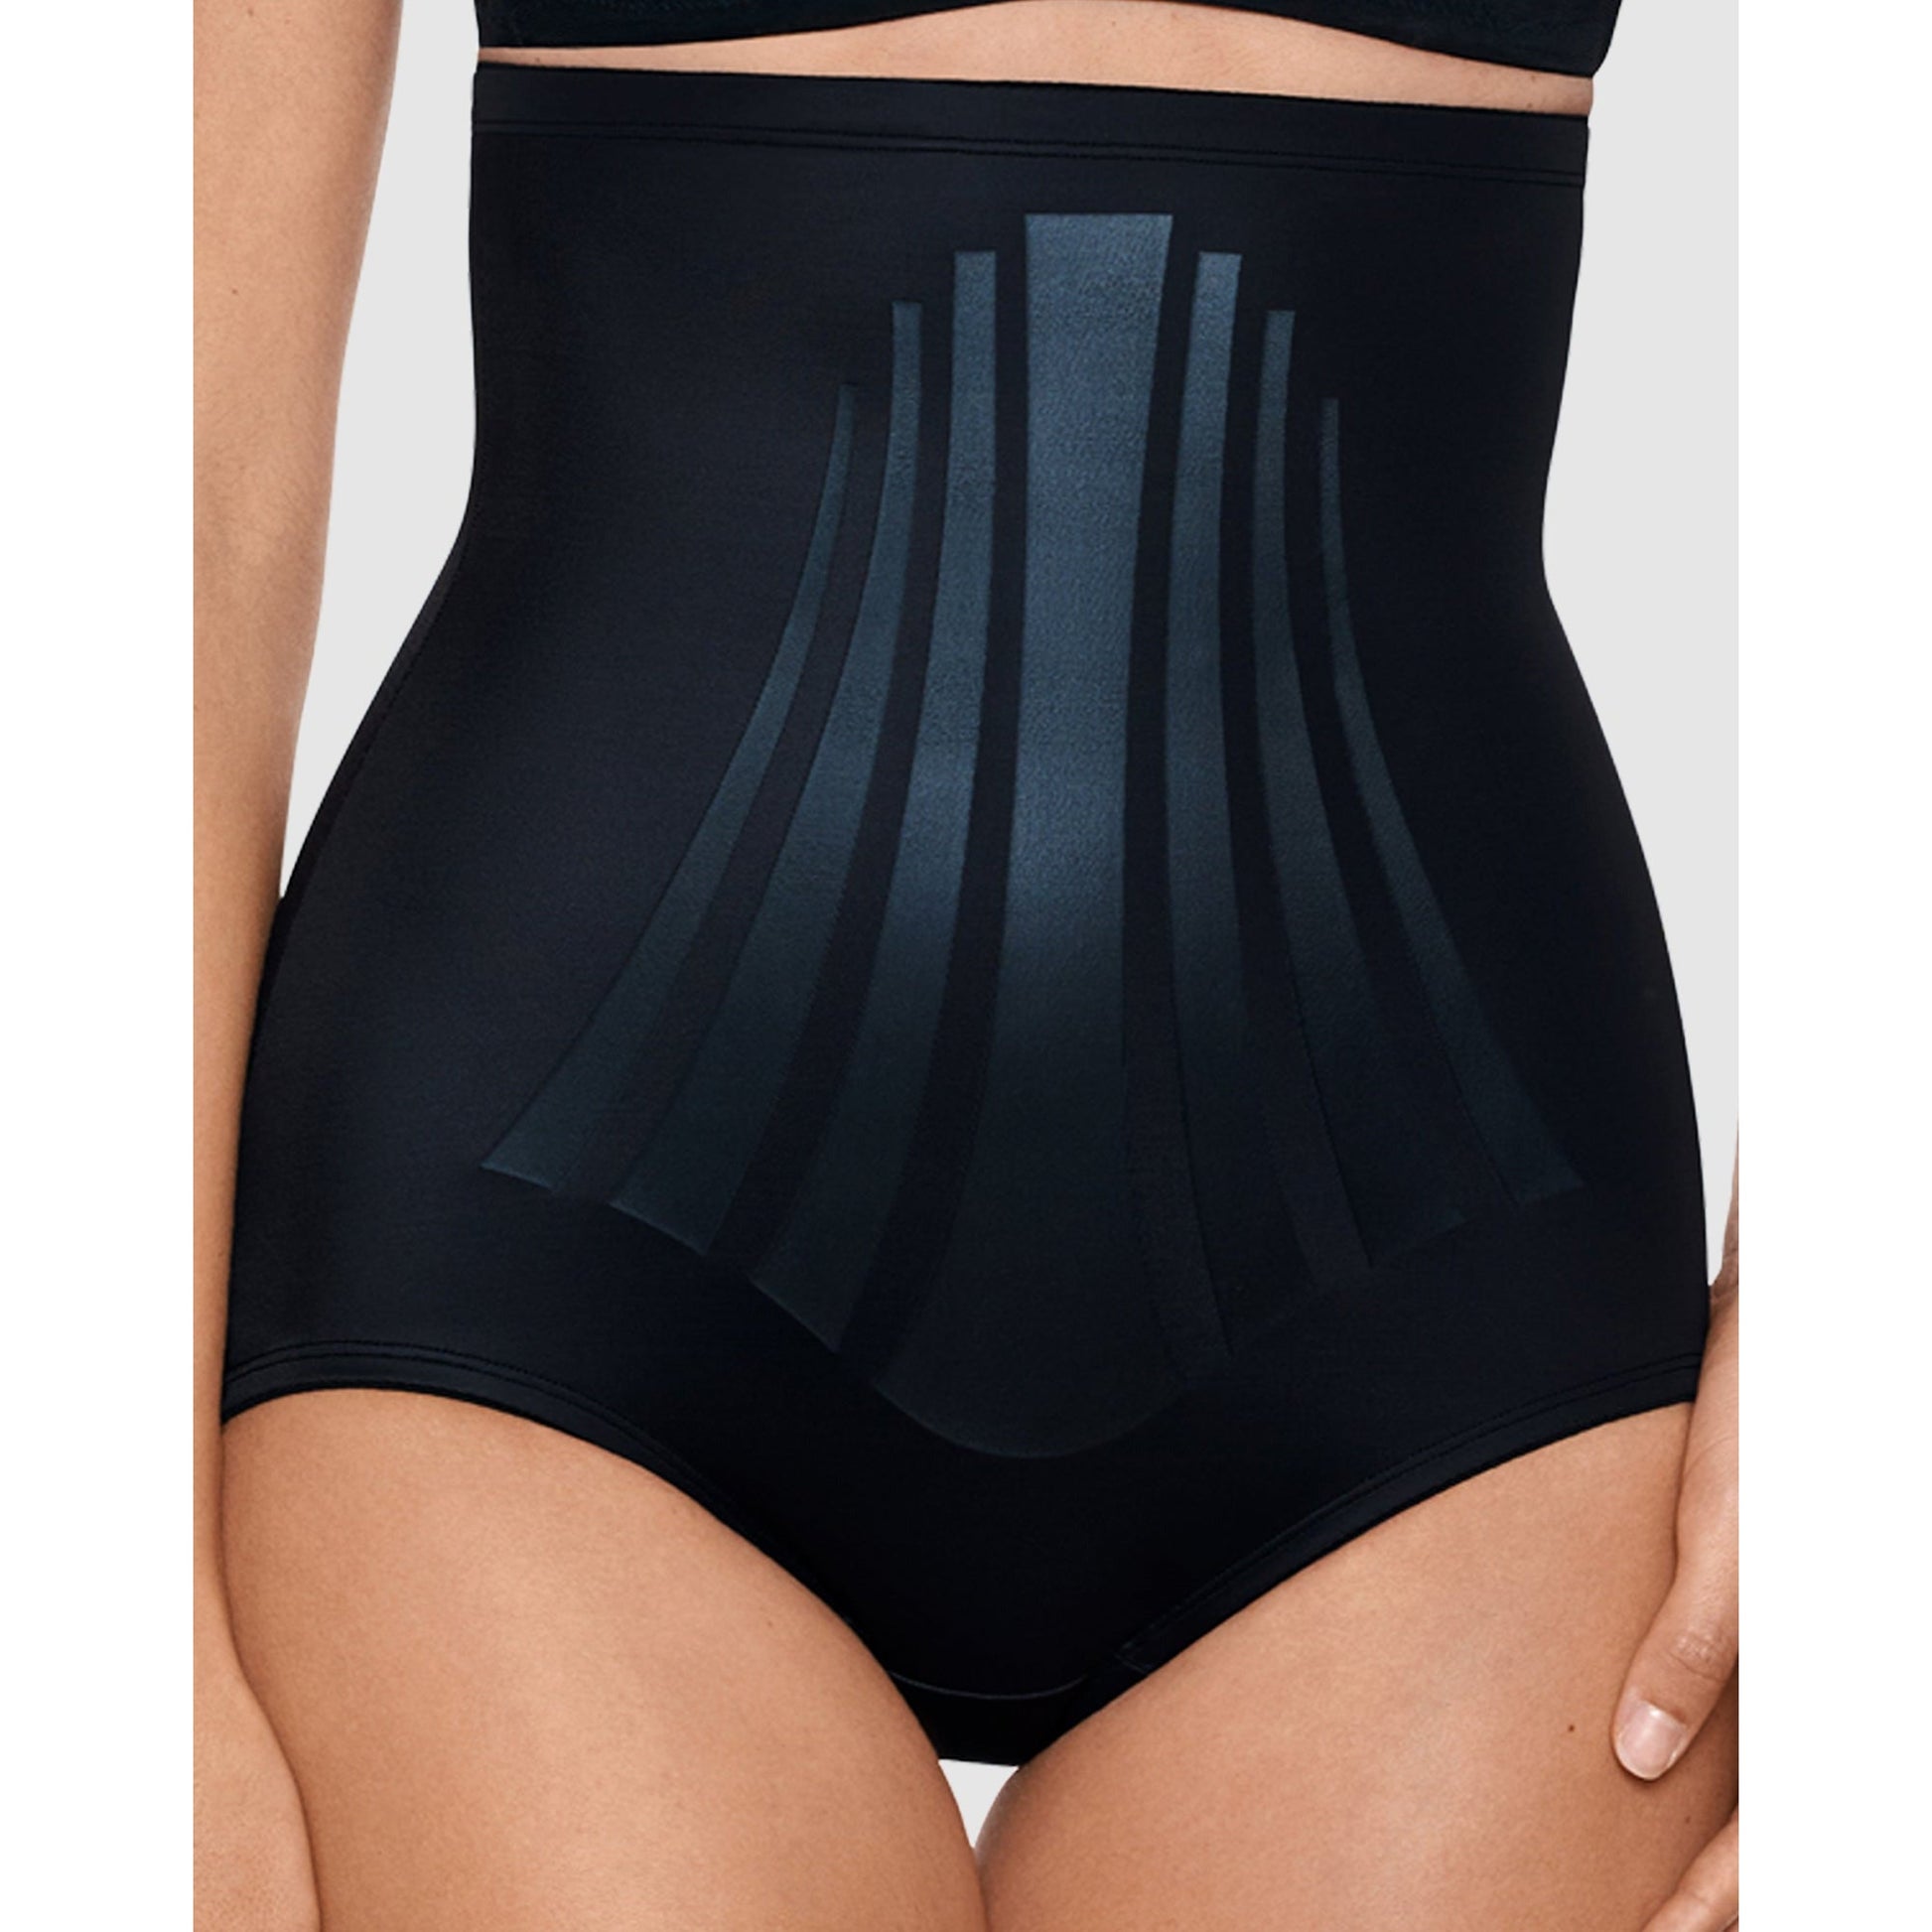 LycraÂ® FitSenseâ„¢ Extra High Waist Shaping Brief - Style Gallery